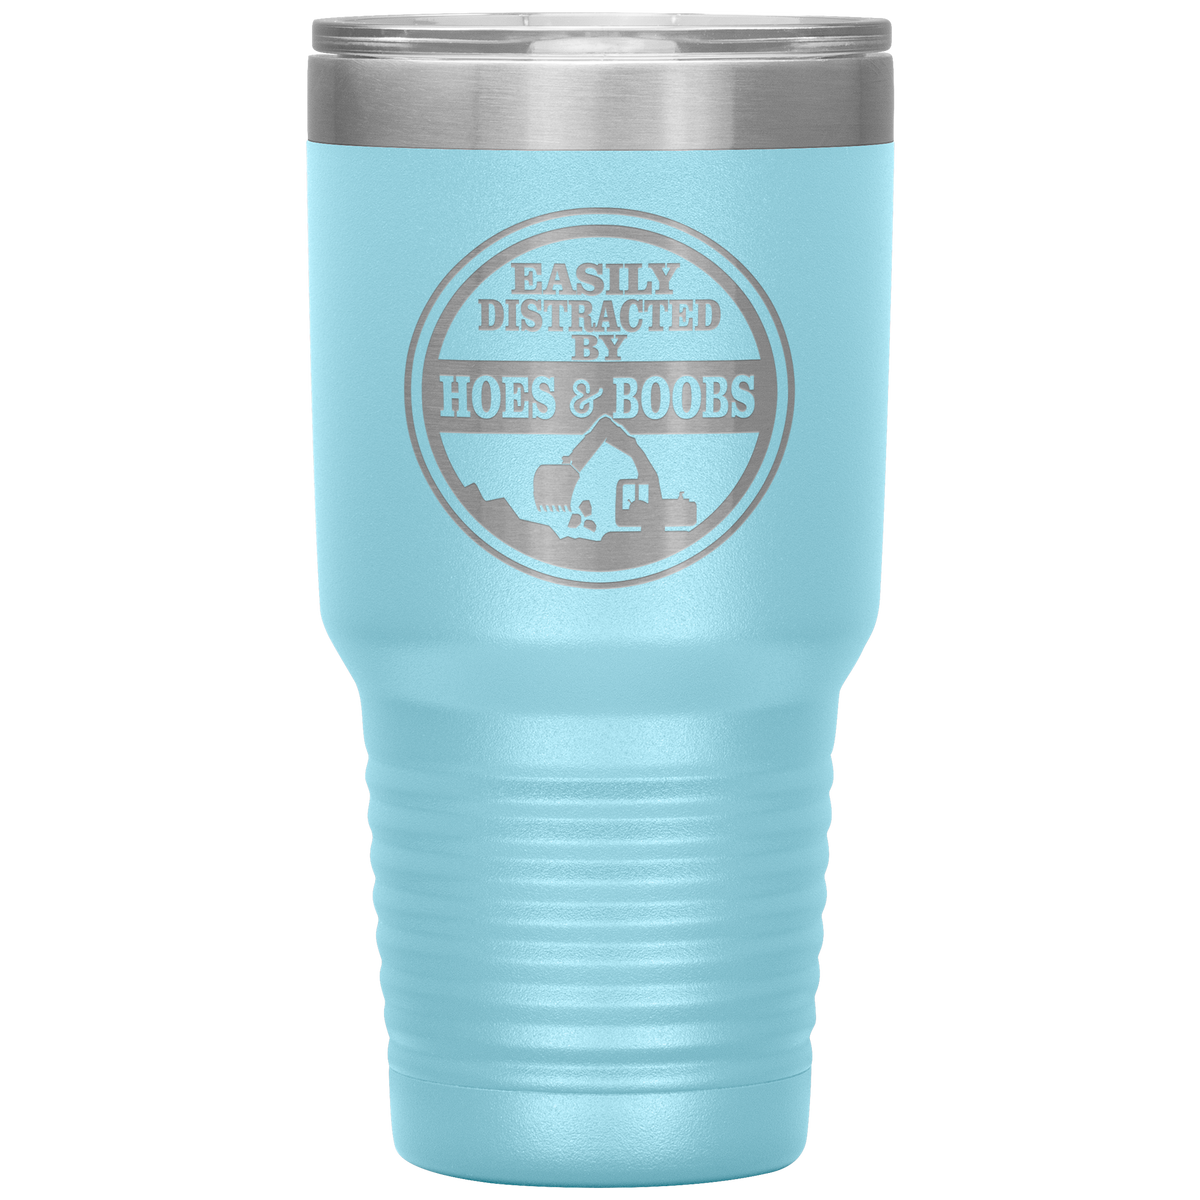 Easily Distracted by Hoes and Boobs Excavator 30oz Tumbler Free Shipping